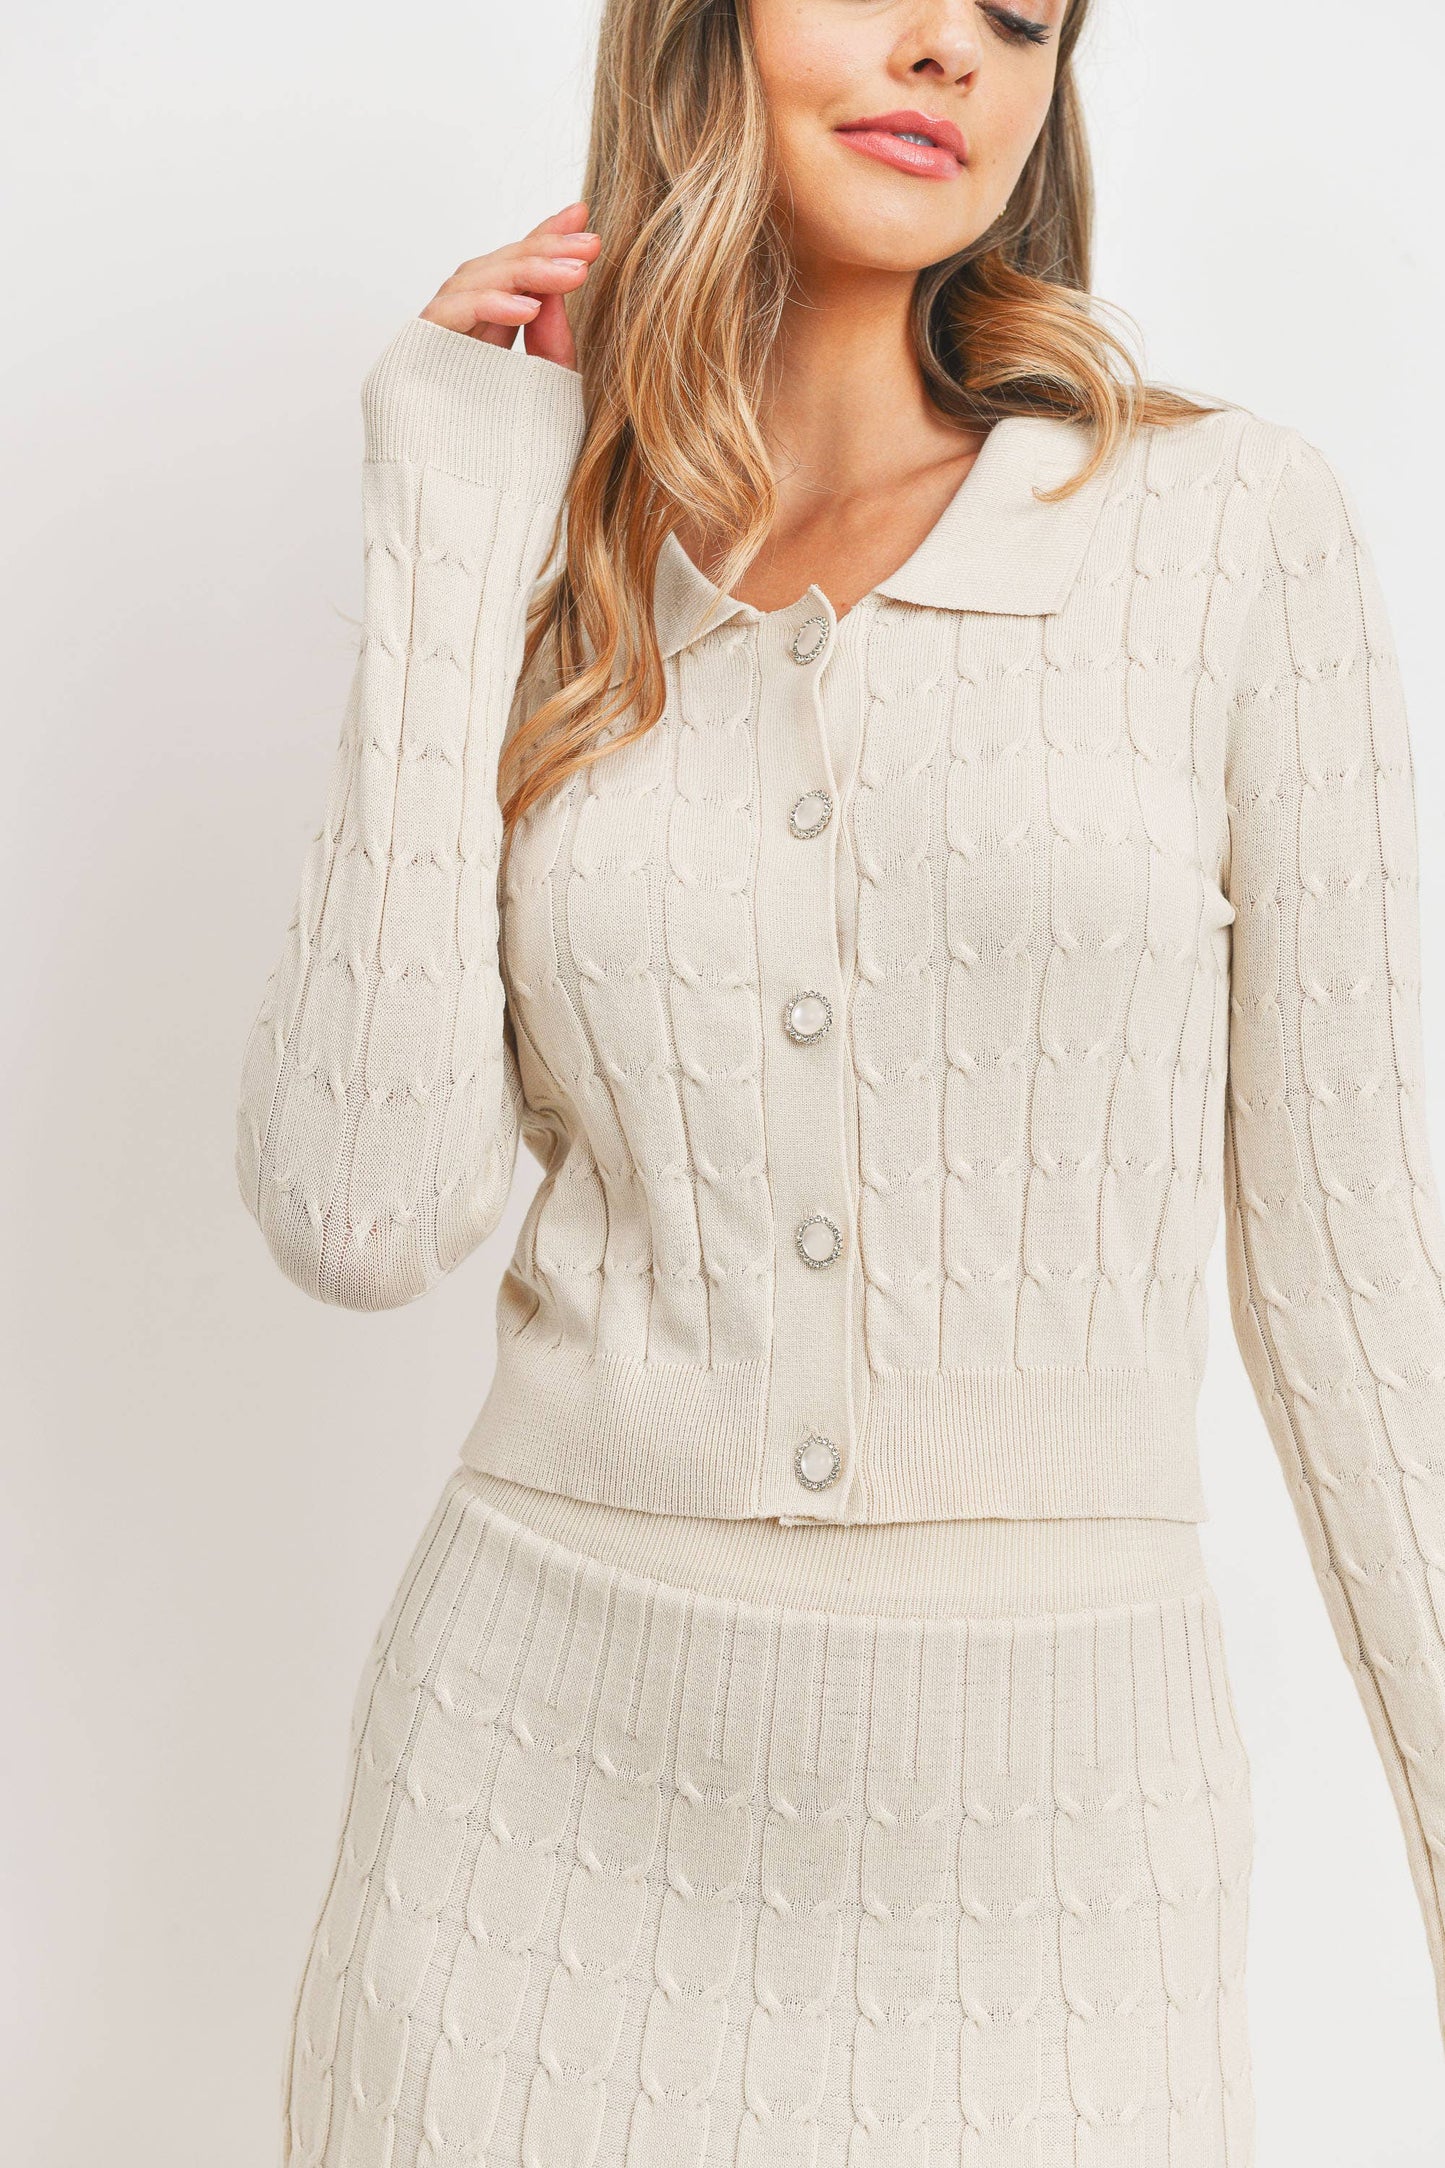 Cece Cable Knit Sweater & Skirt